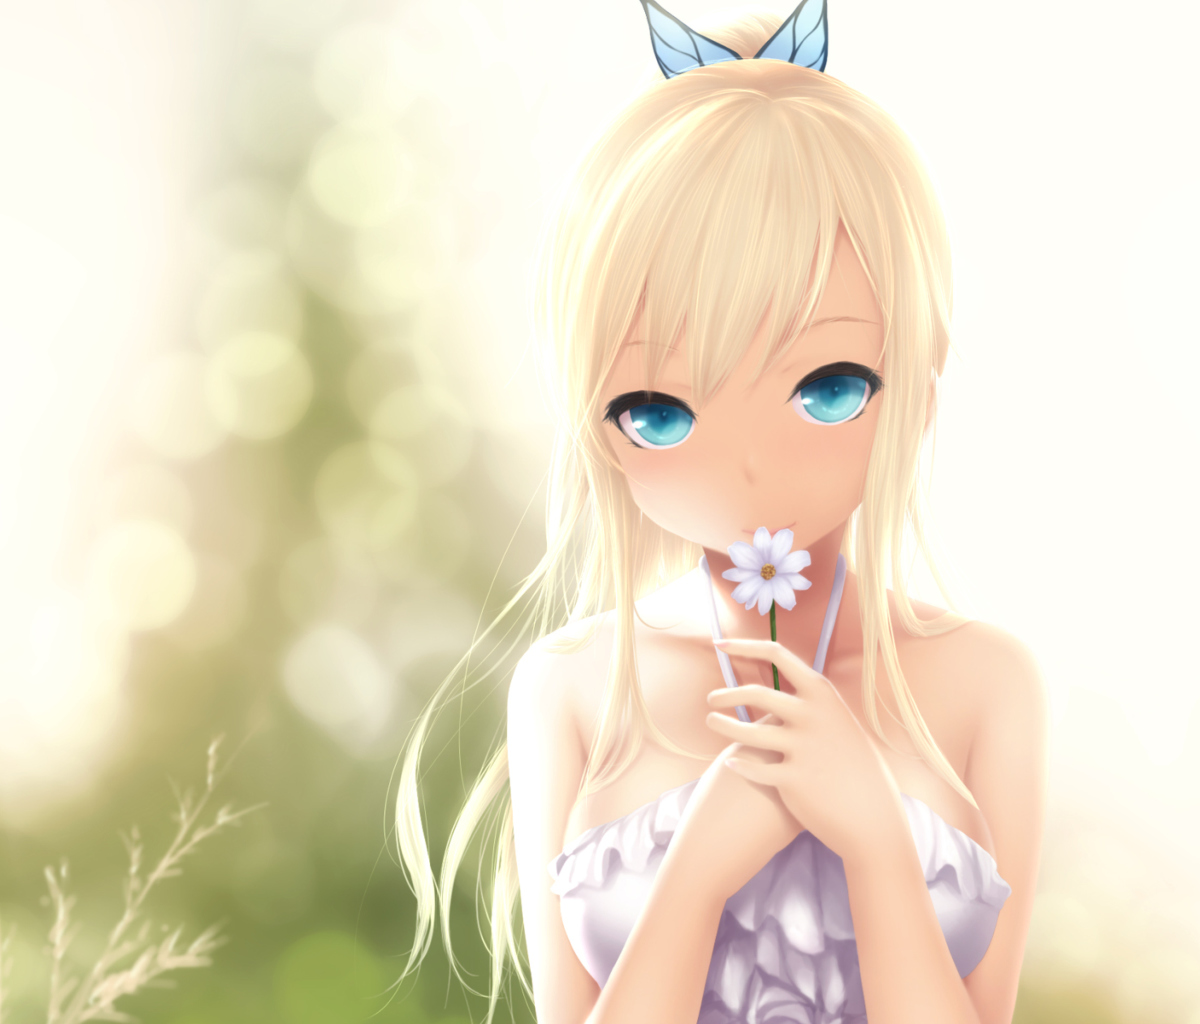 Das Anime Blonde With Daisy Wallpaper 1200x1024